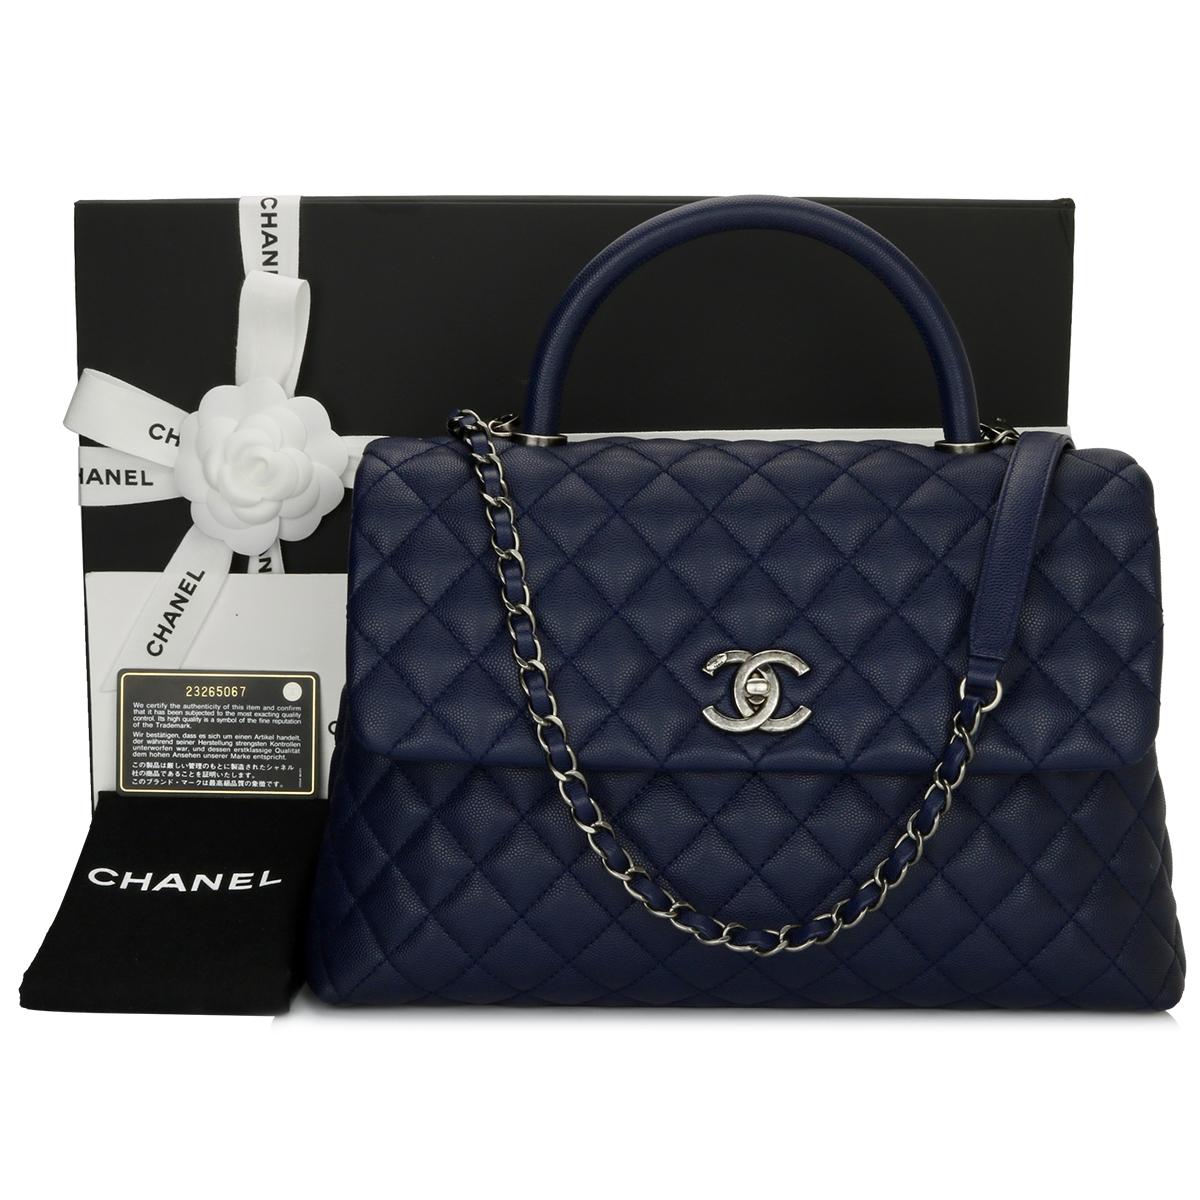 Chanel Coco Handle Bag Large Navy Caviar with Ruthenium Hardware 2017 9